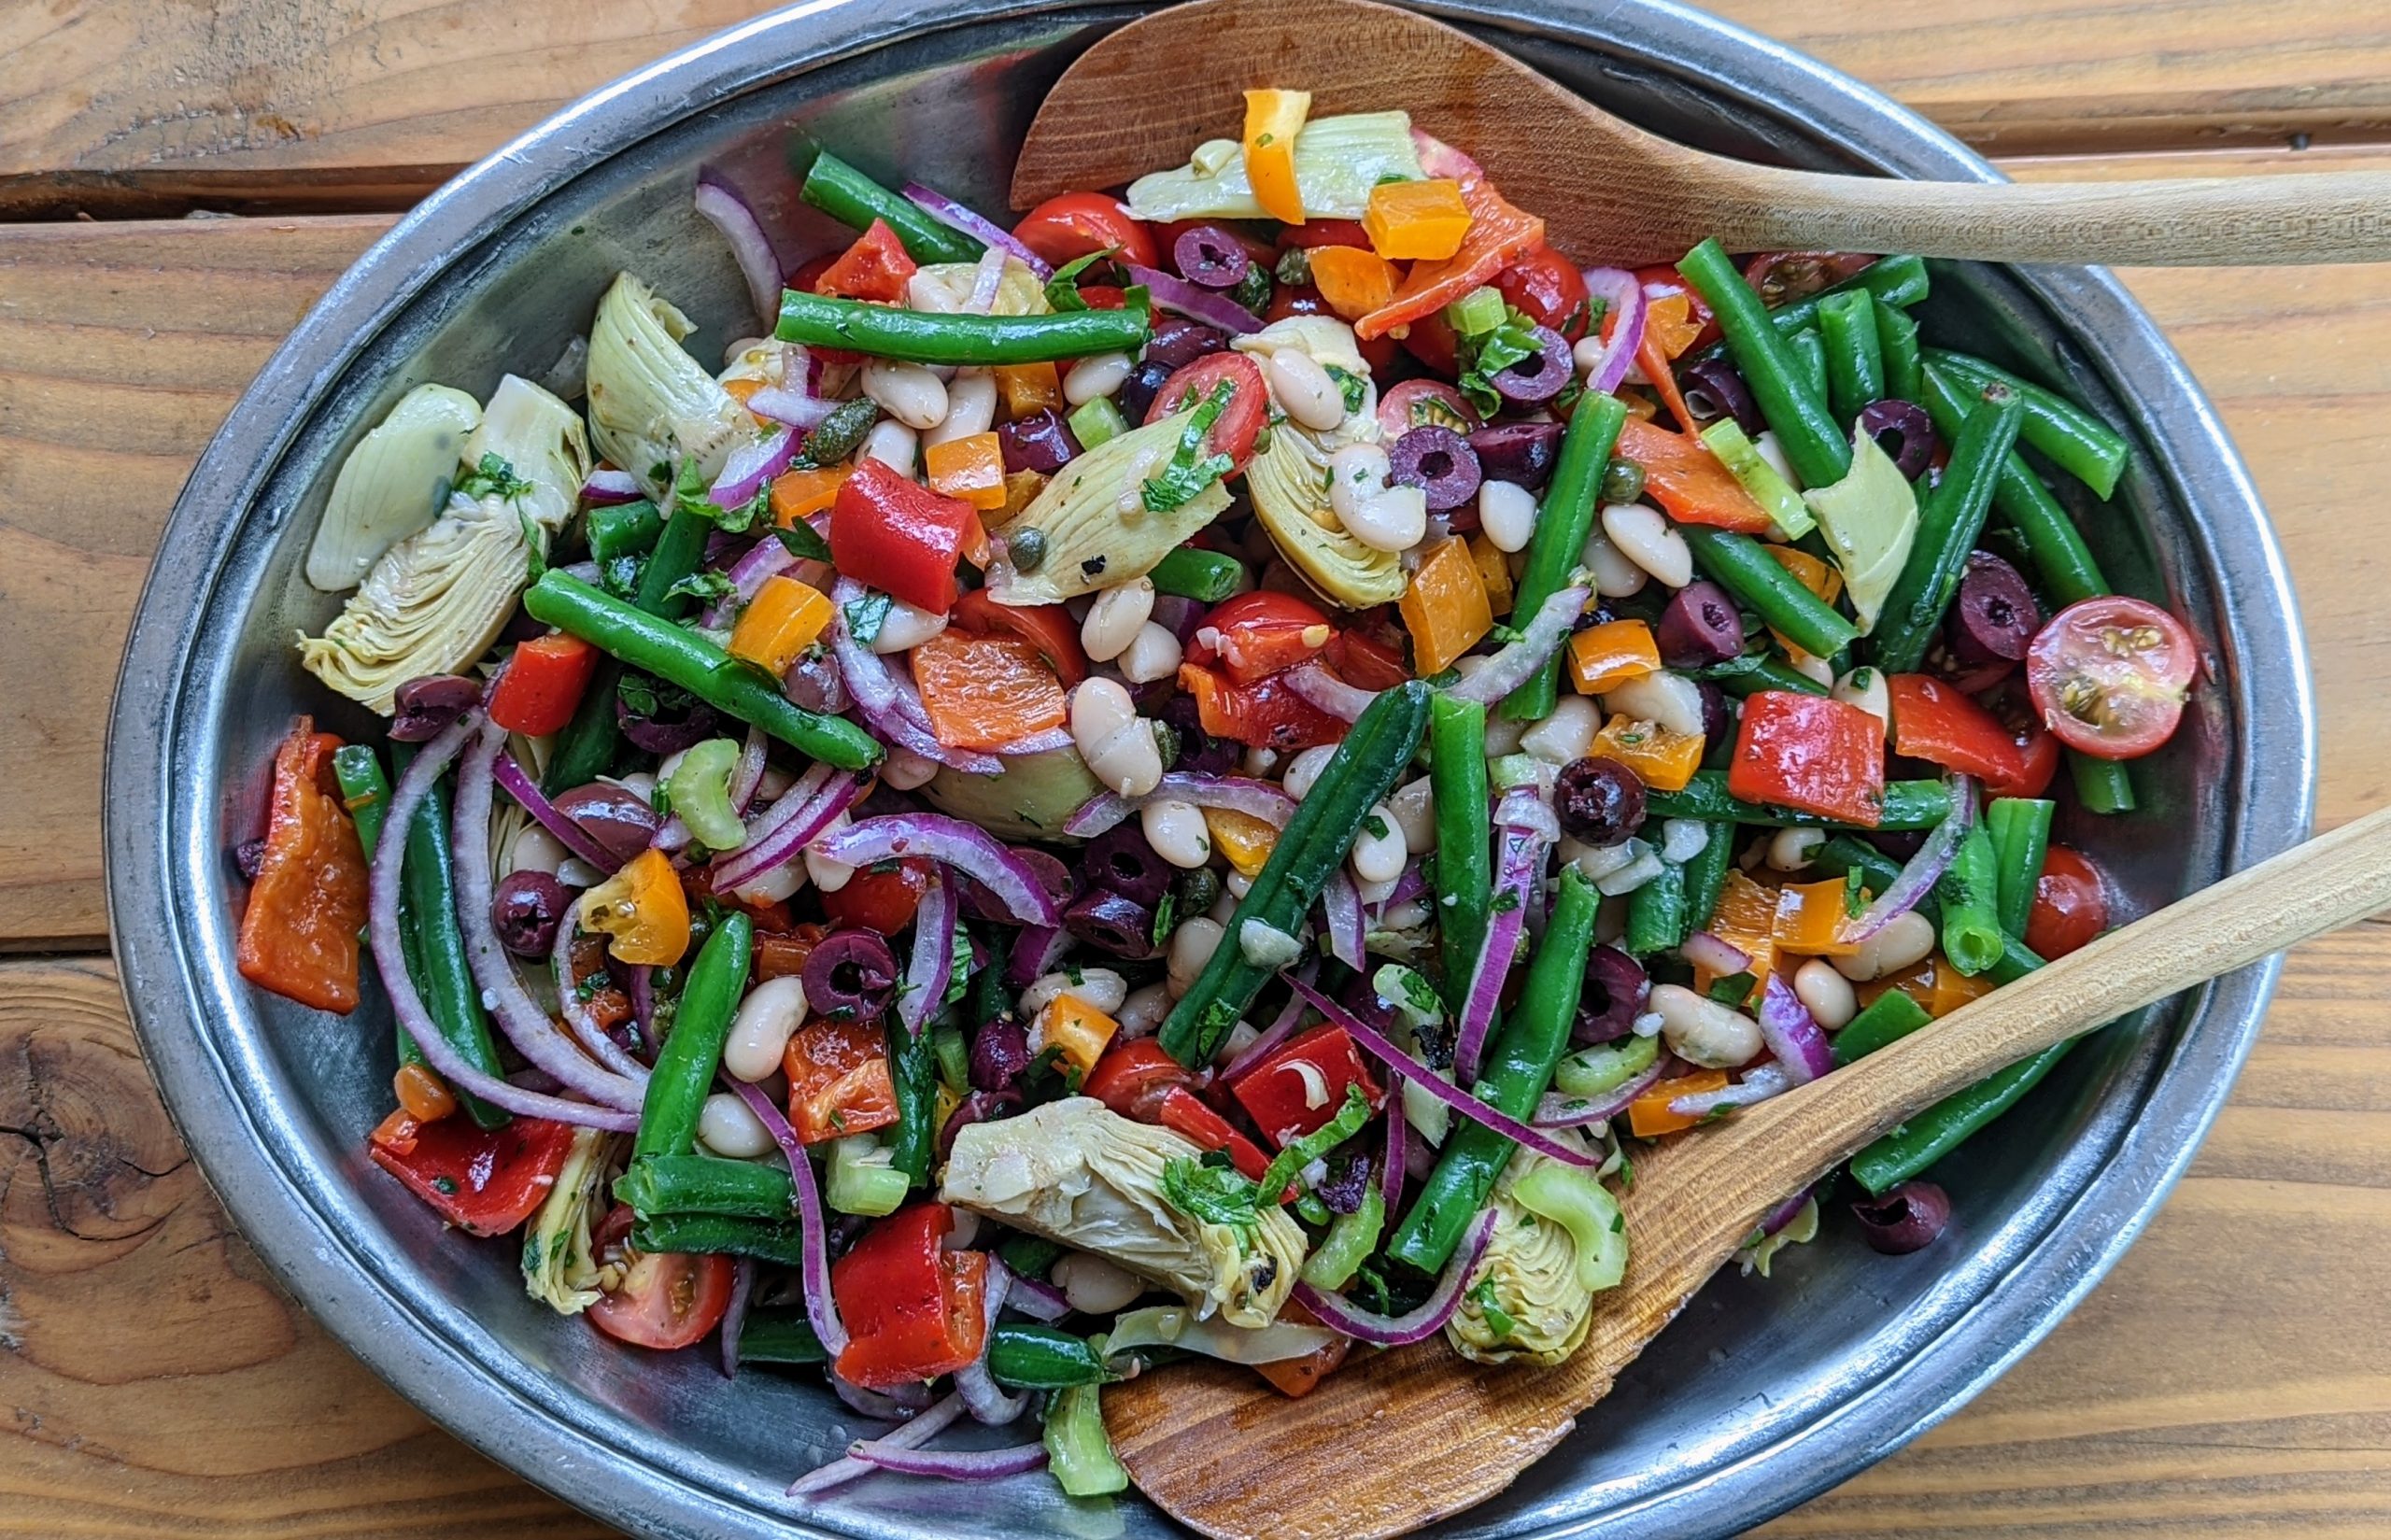 Featured image for “Vegetarian Antipasto Salad”